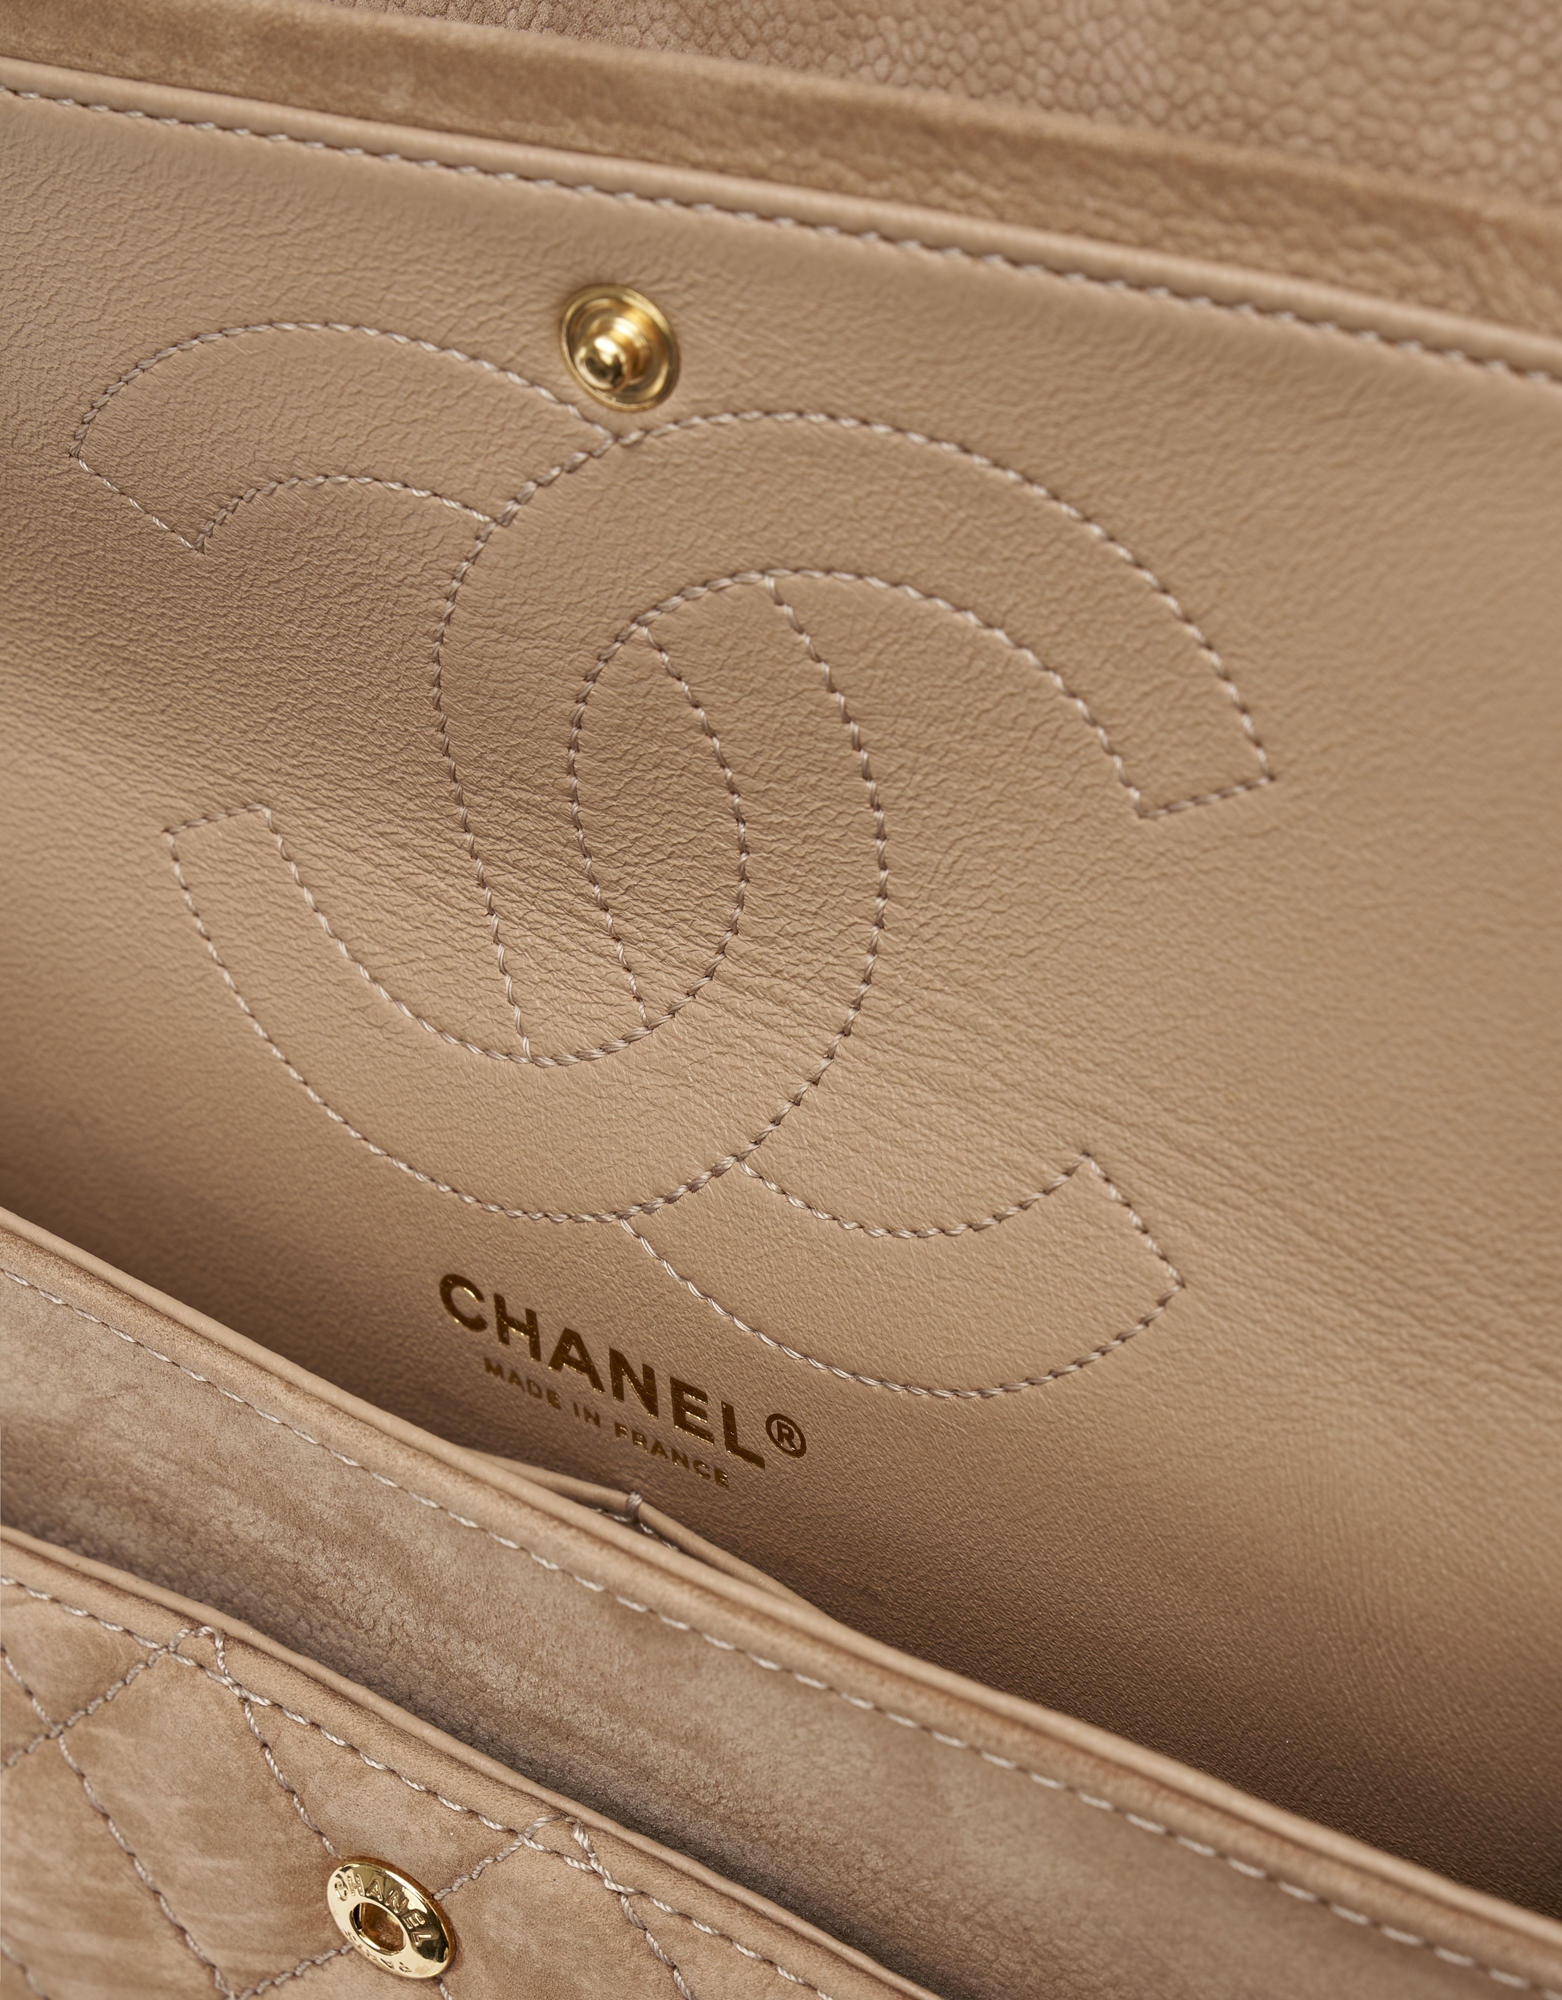 Chanel 2.55 Suede Nude Size 226